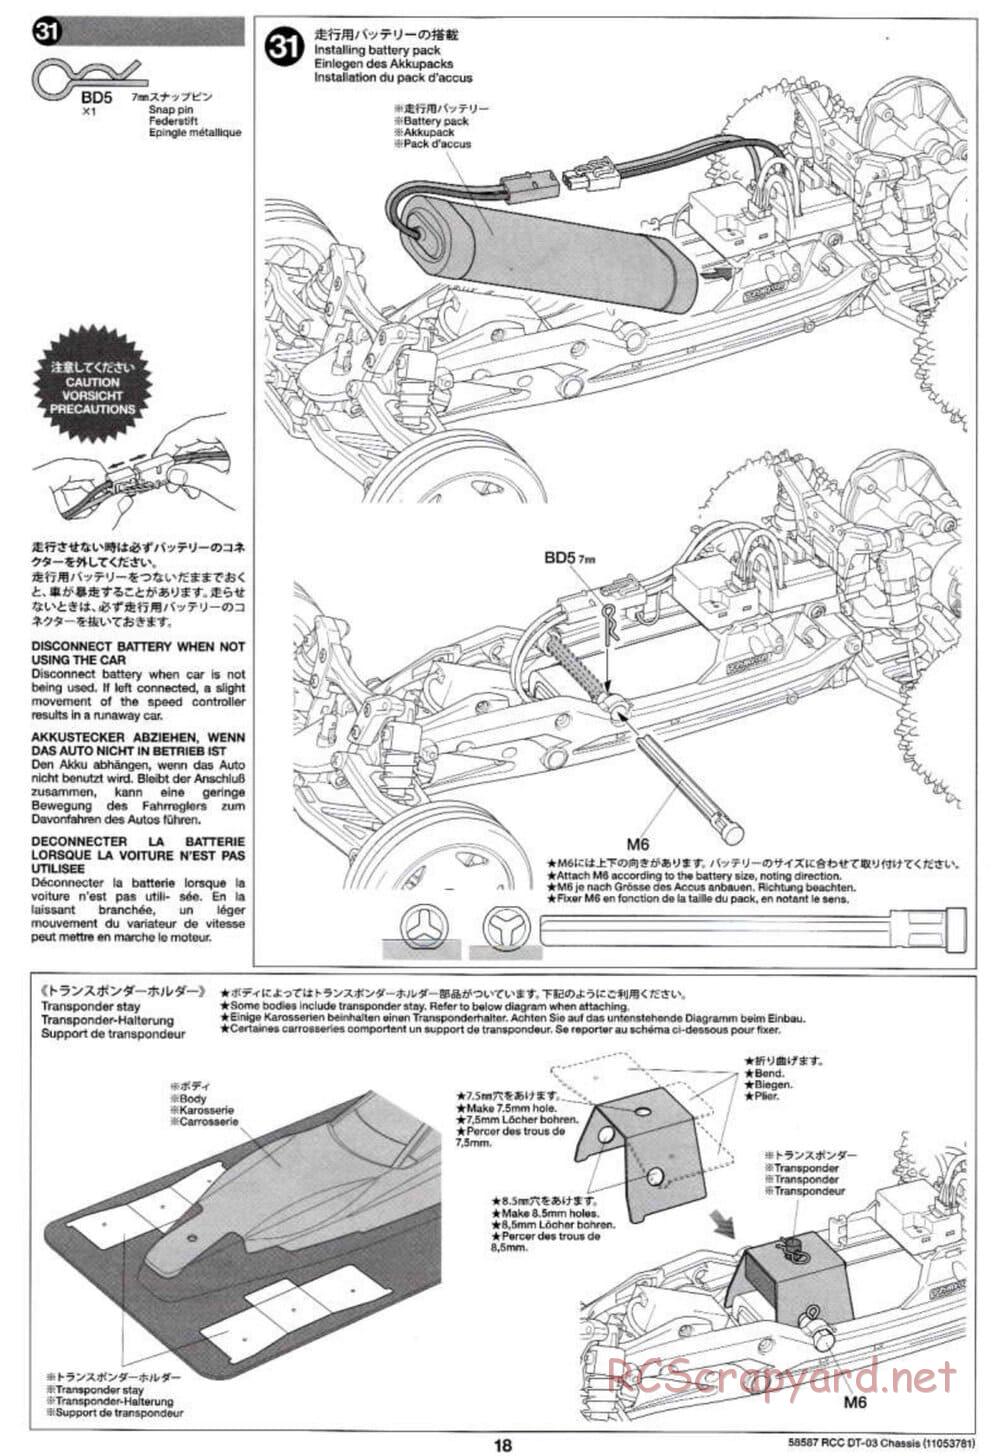 Tamiya - Neo Fighter Buggy Chassis - Manual - Page 18